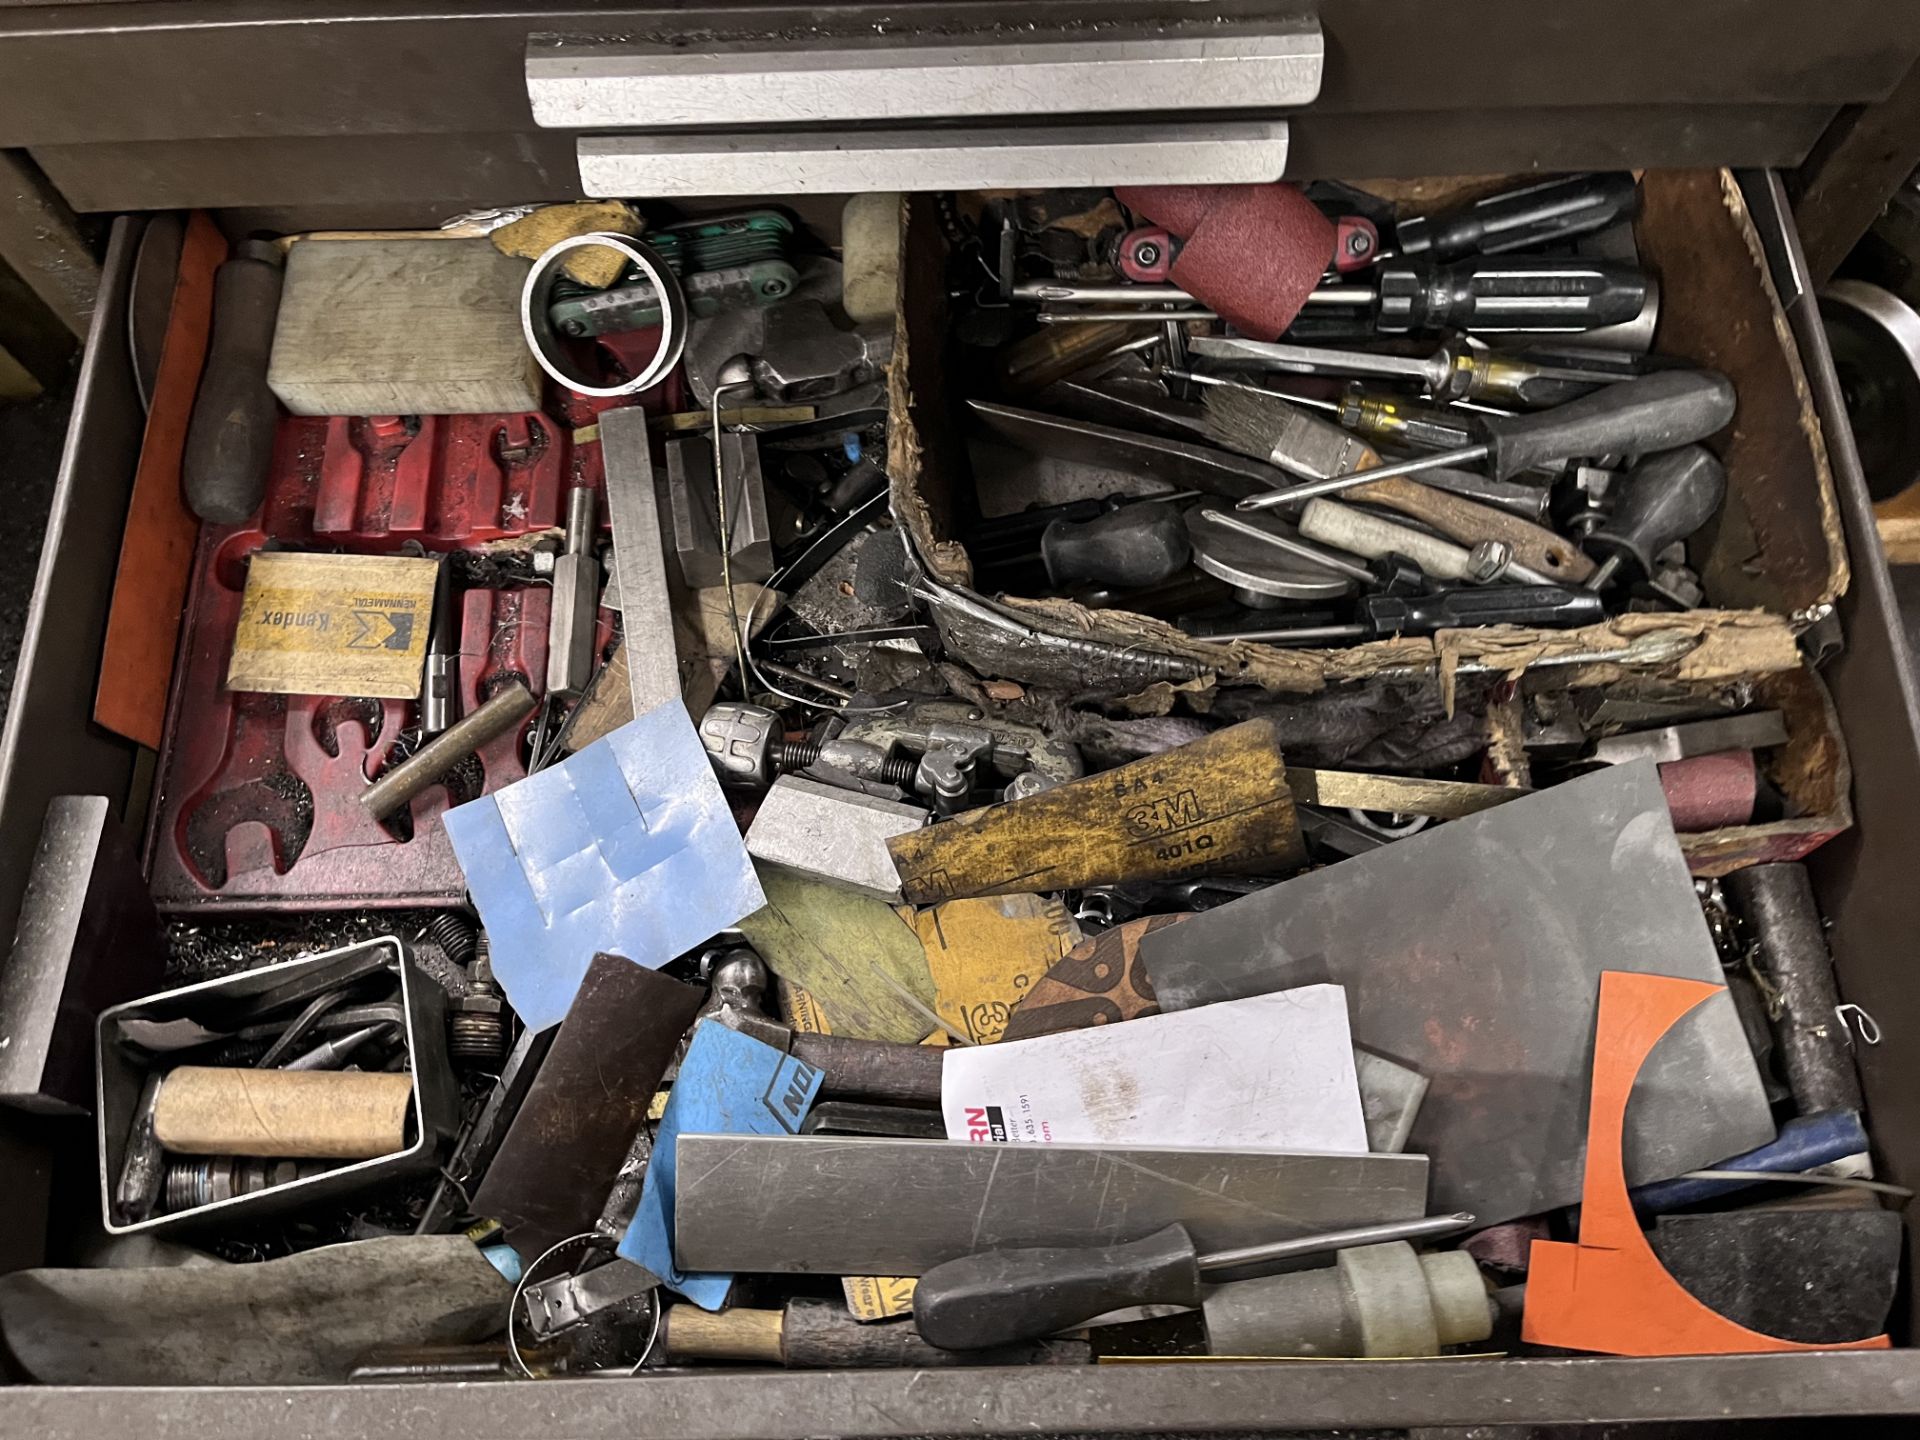 Tool Chest Full of Tools - Image 4 of 9